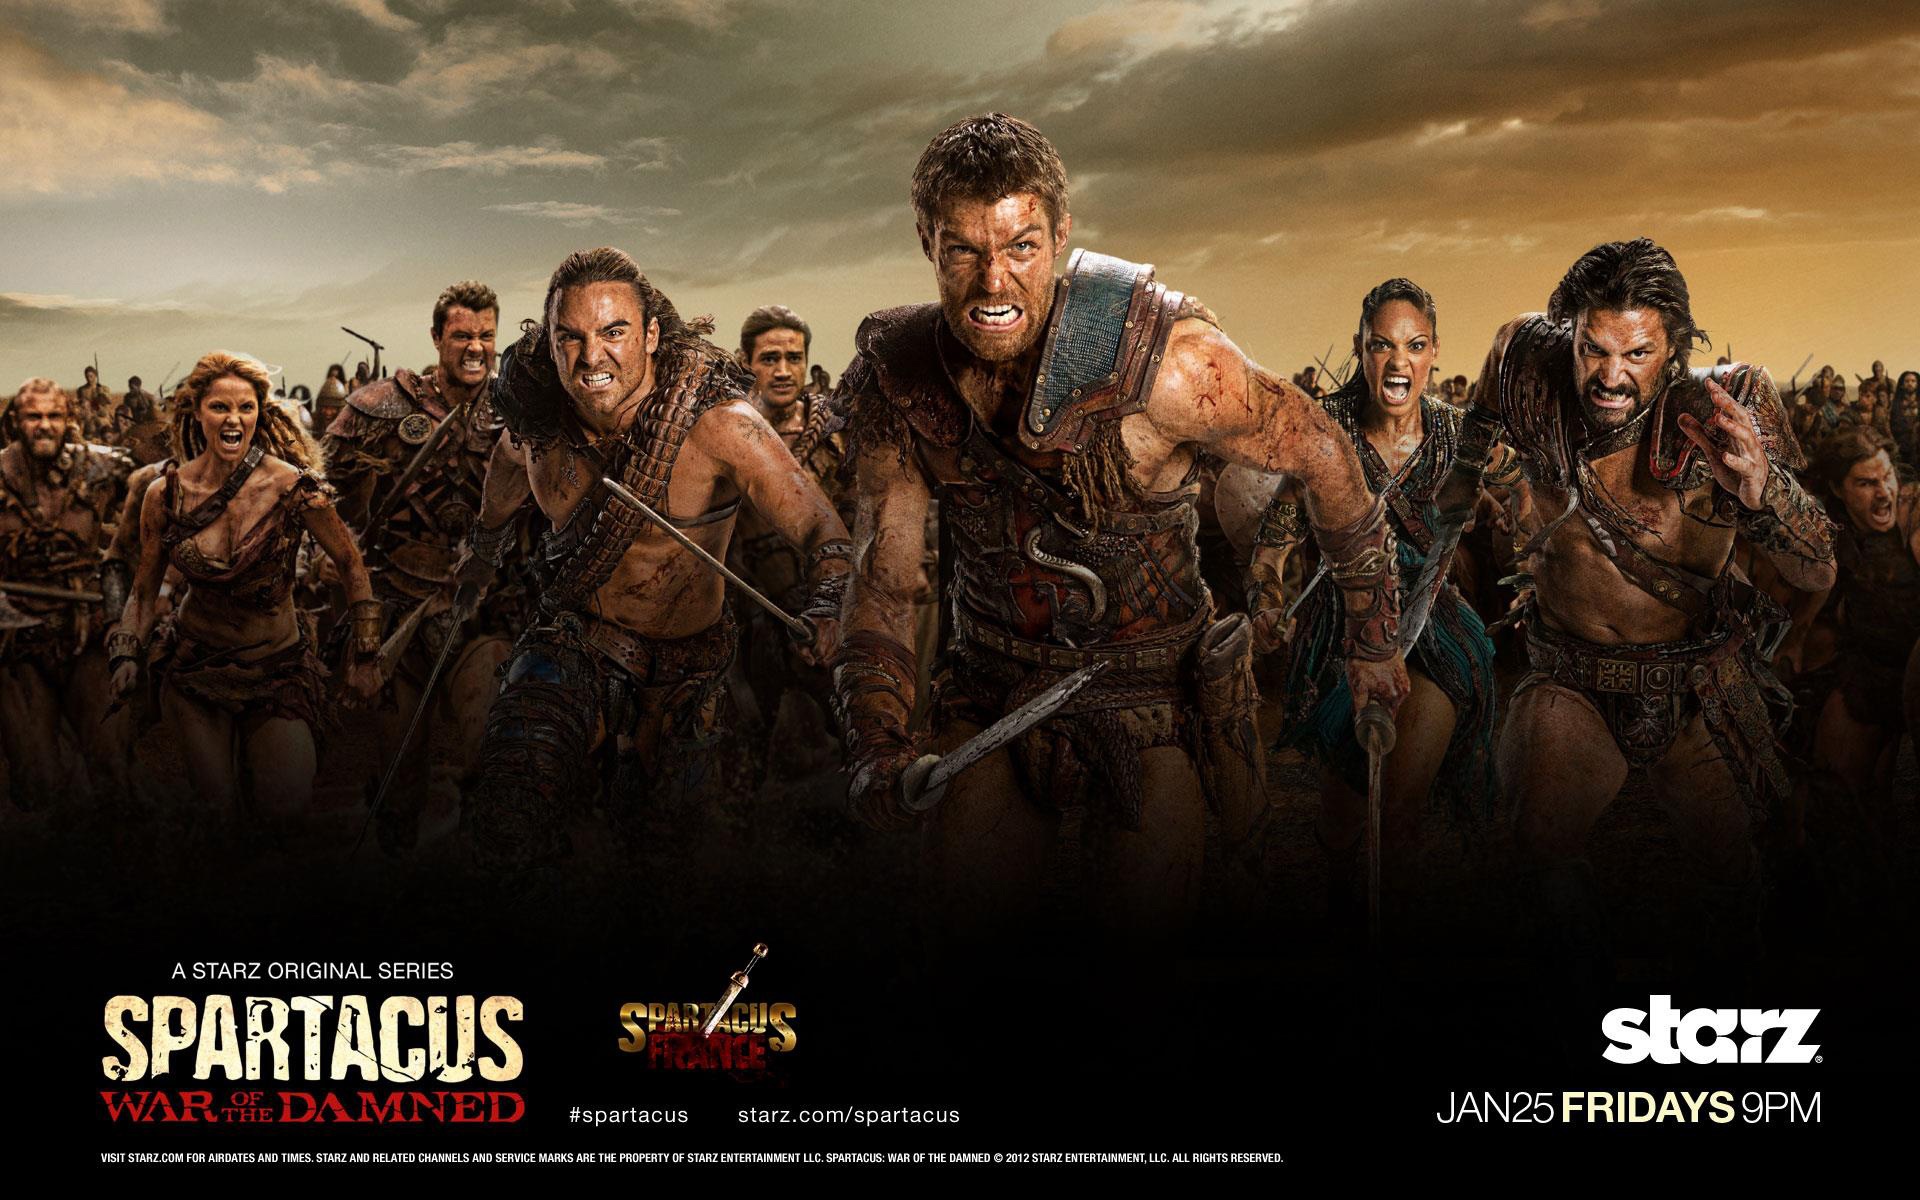 Spartacus: War of the Damned HD wallpapers #1 - 1920x1200